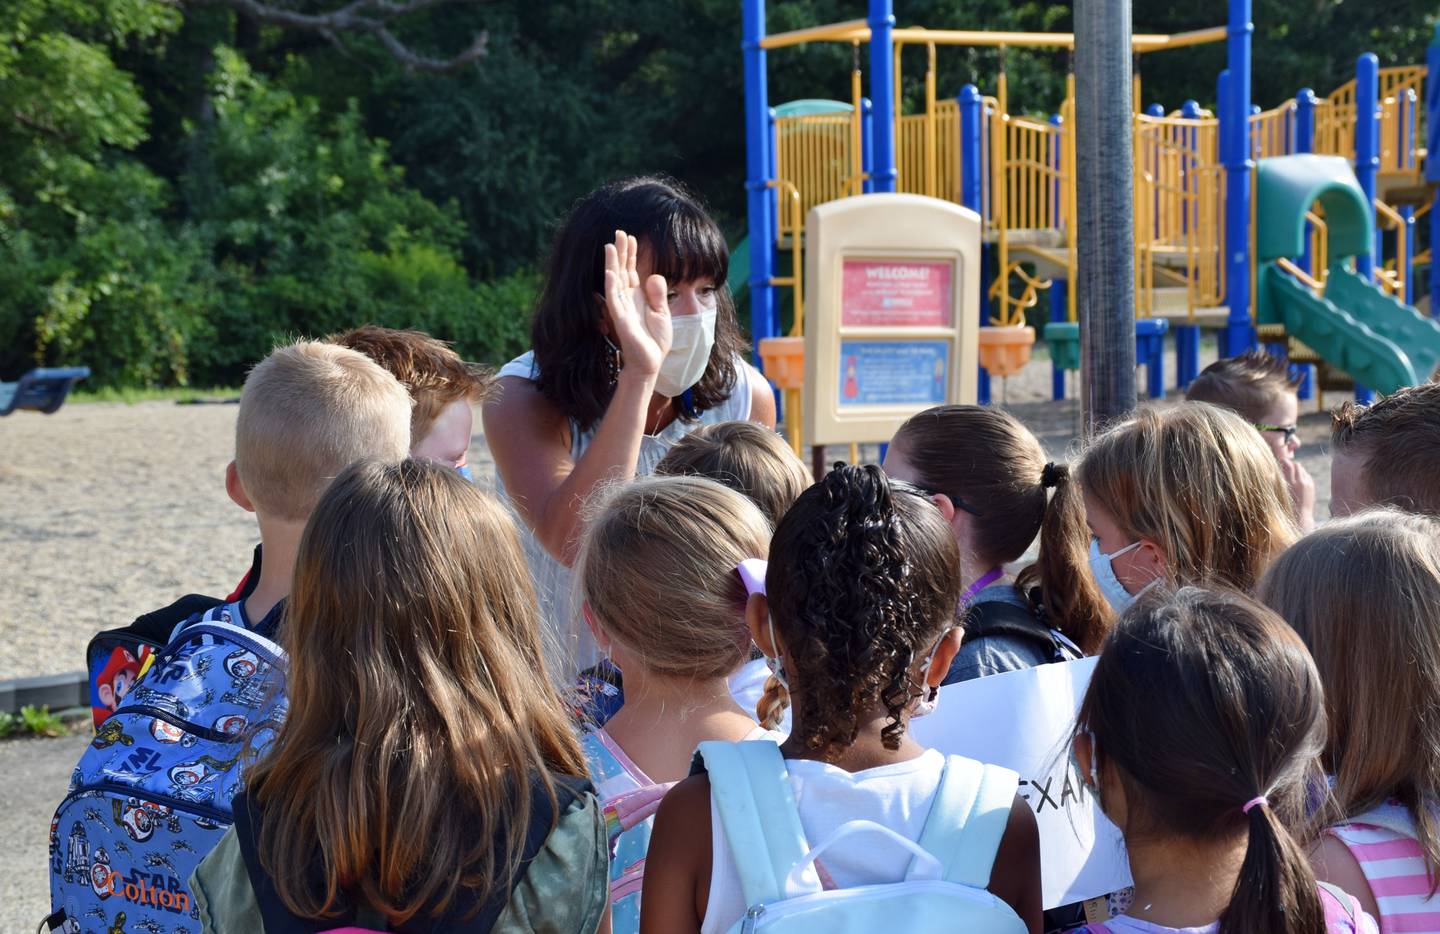 First grade teacher Sarah Alexander talks to her students before the first day of school Aug. 18, 2021 at North Elementary School in Sycamore.